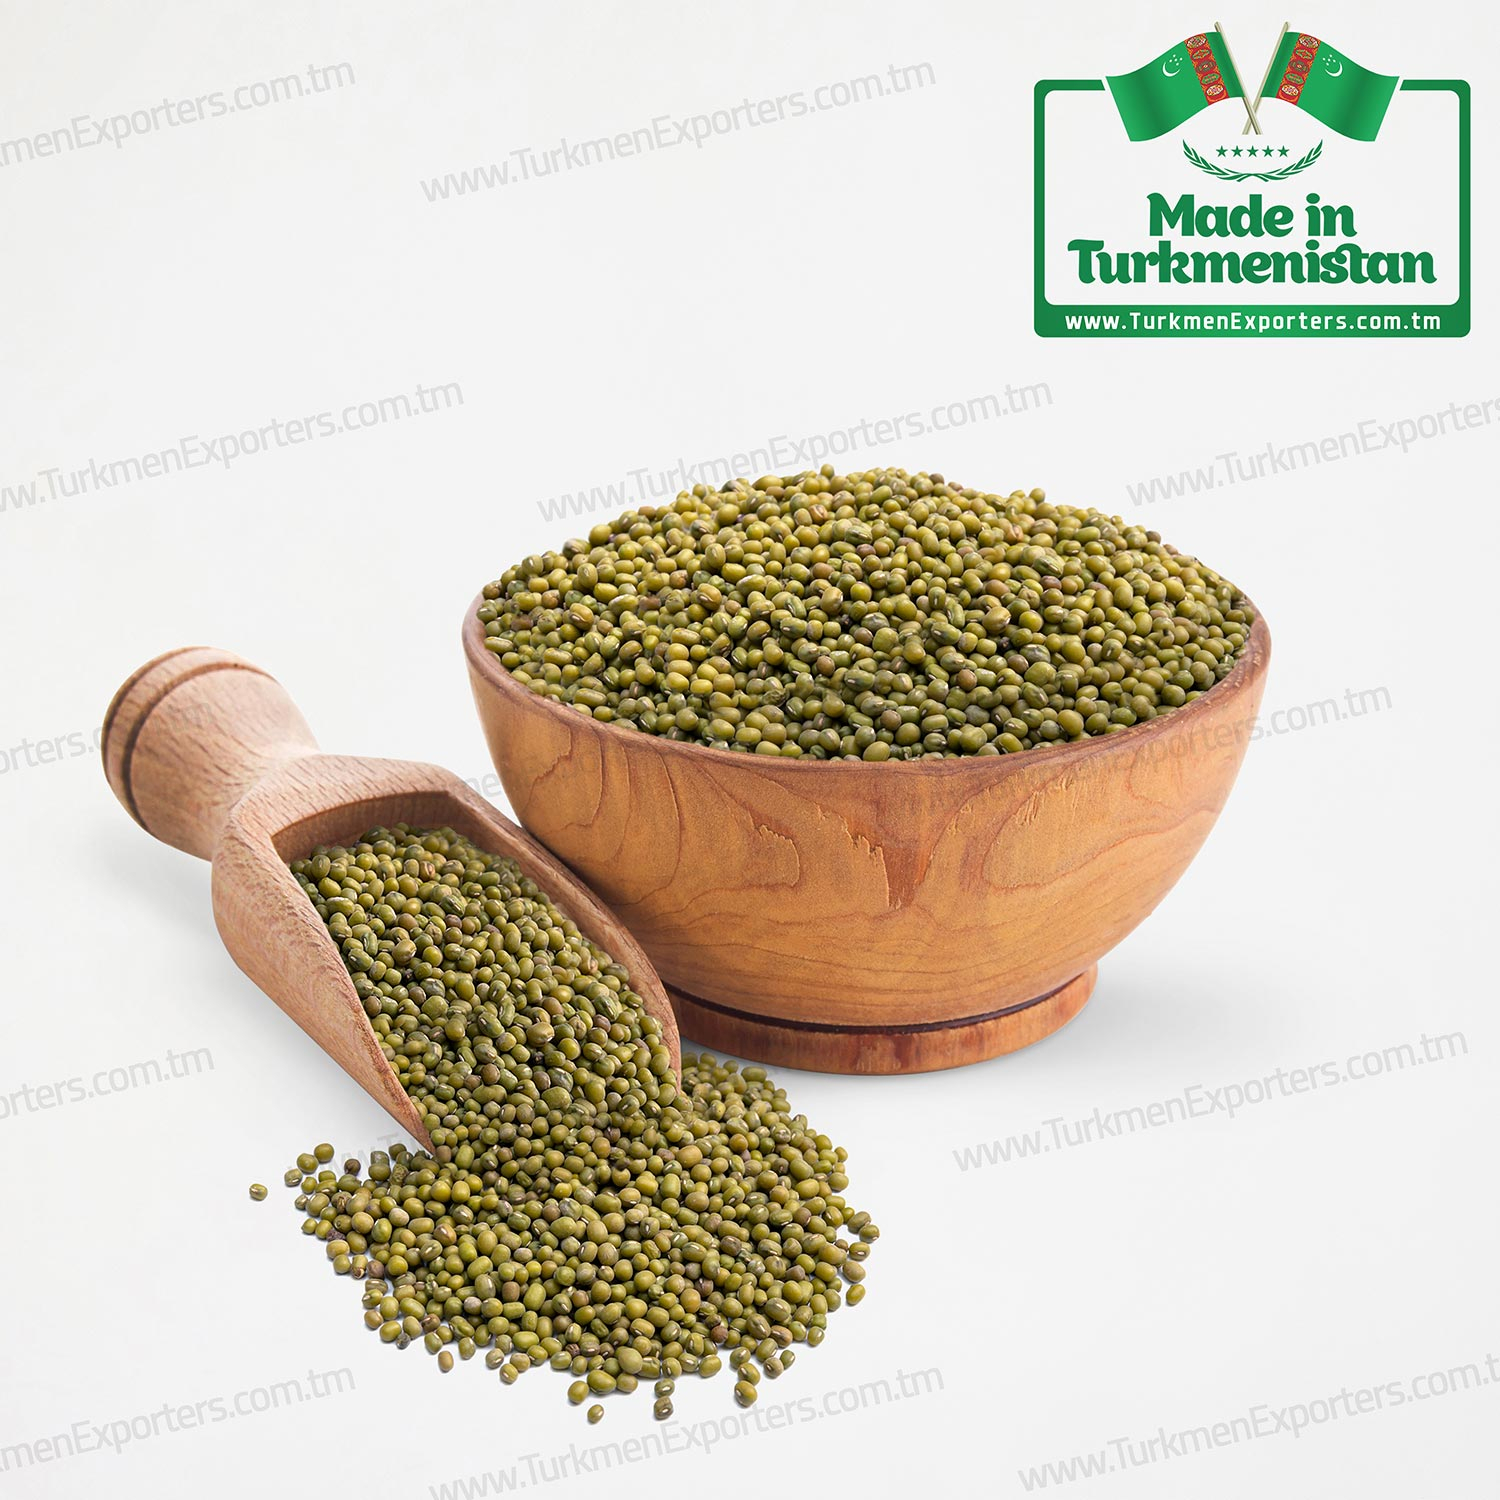 Green mung beans wholesale from Turkmenistan | Agricultural complex of Turkmenistan